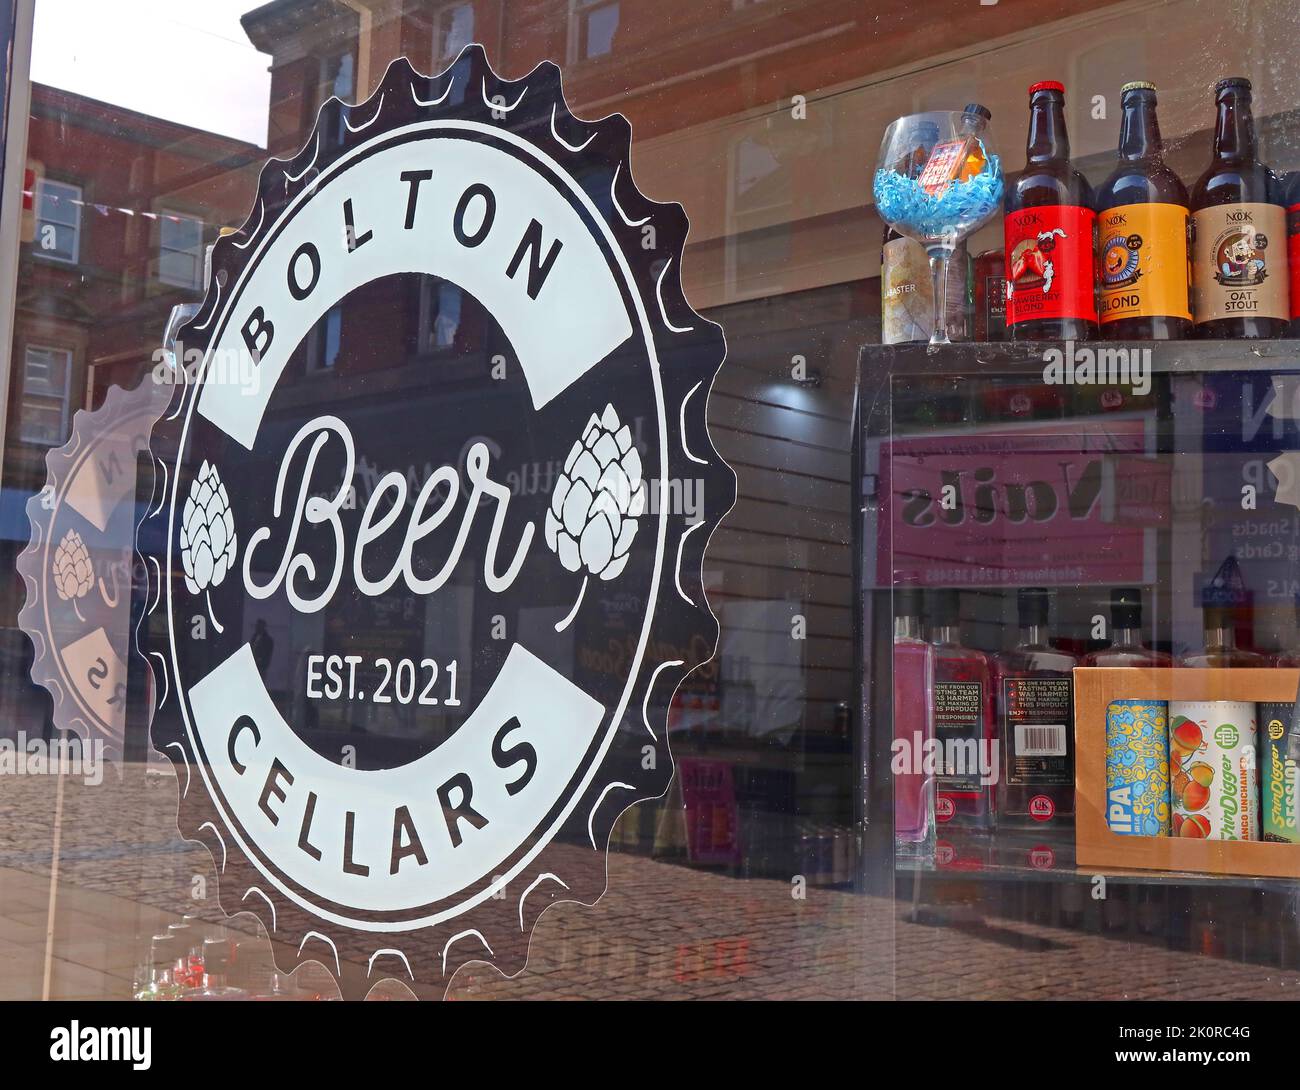 Bolton Beer Cellars, est 2021, 22 Corporation St, Bolton, Greater Manchester, INGHILTERRA, REGNO UNITO, BL1 2AN Foto Stock